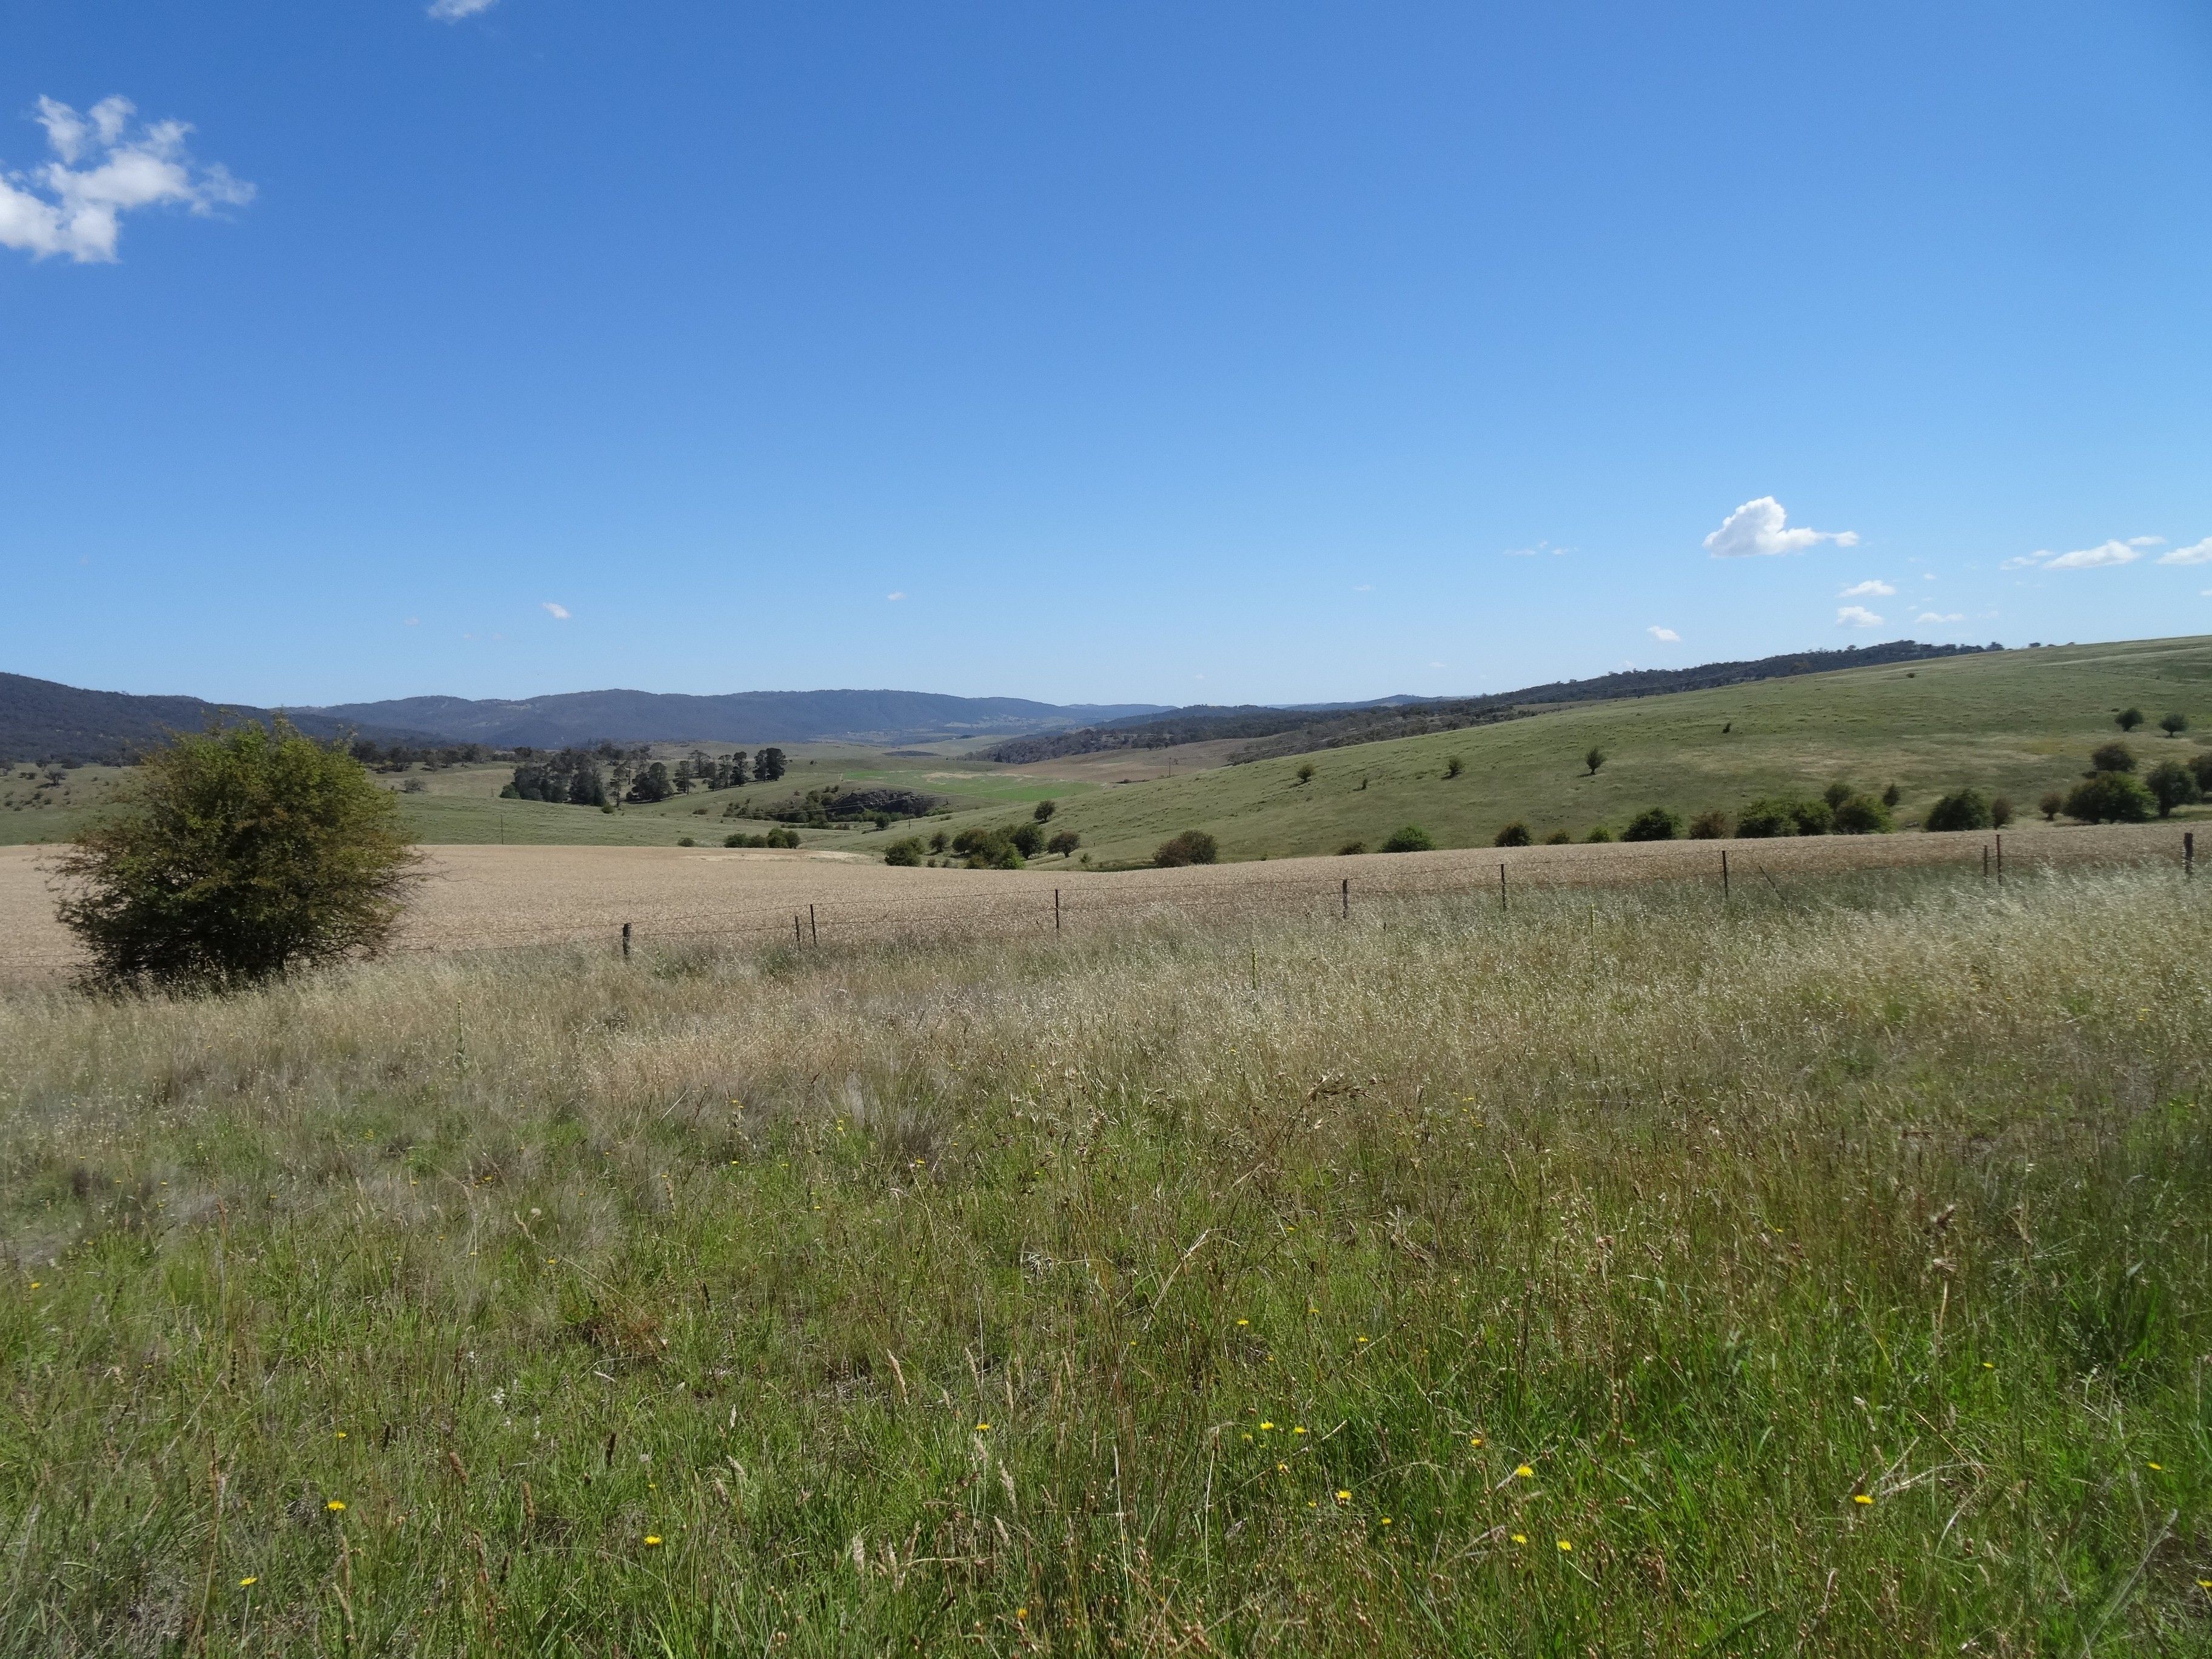 The scenic route: Jindabyne to Cooma